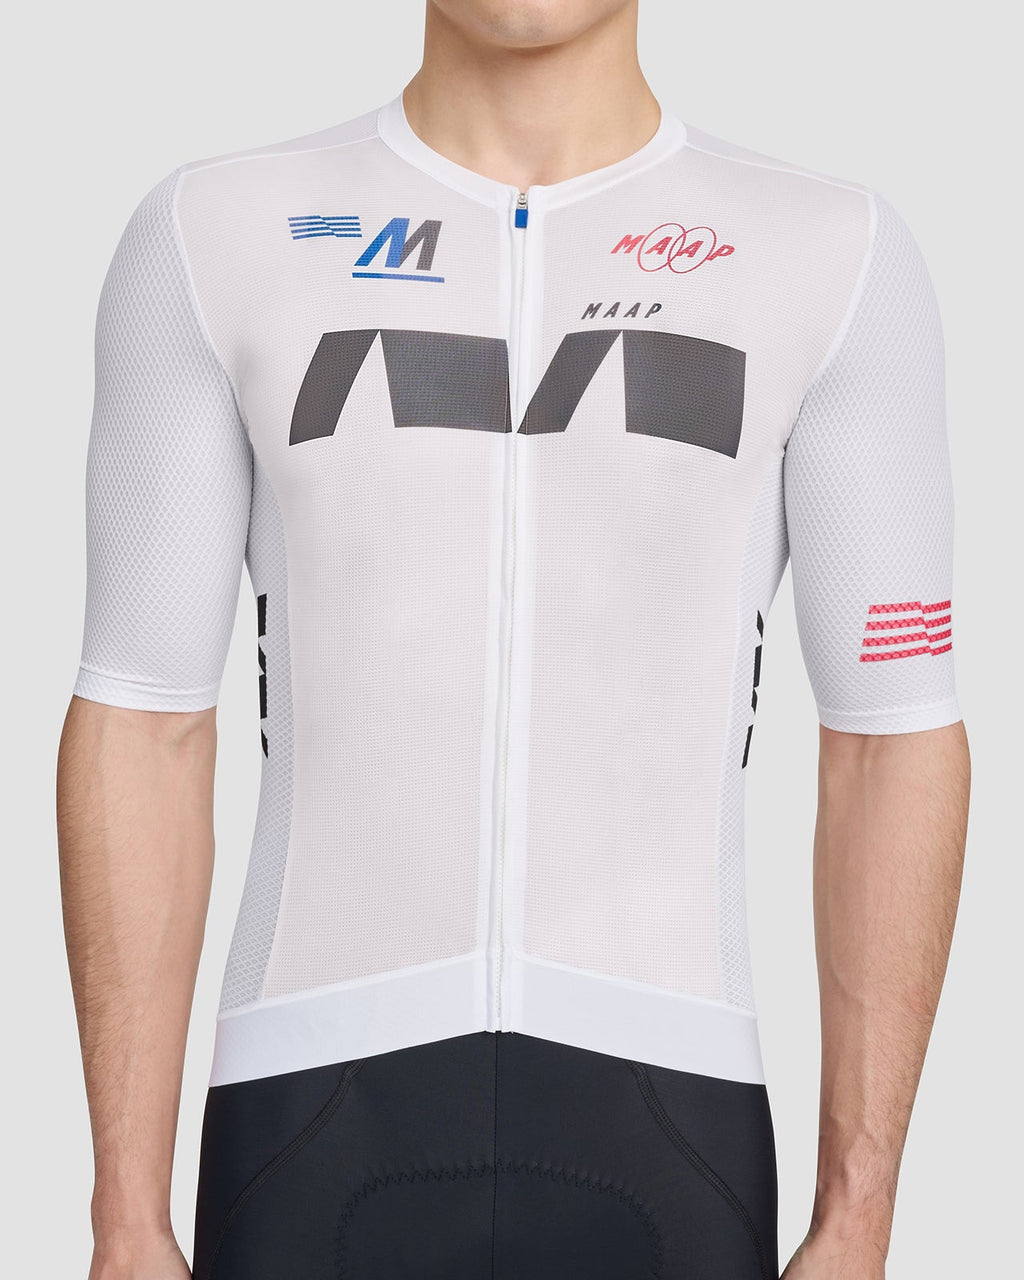 MAAP Trace Pro Air Jersey